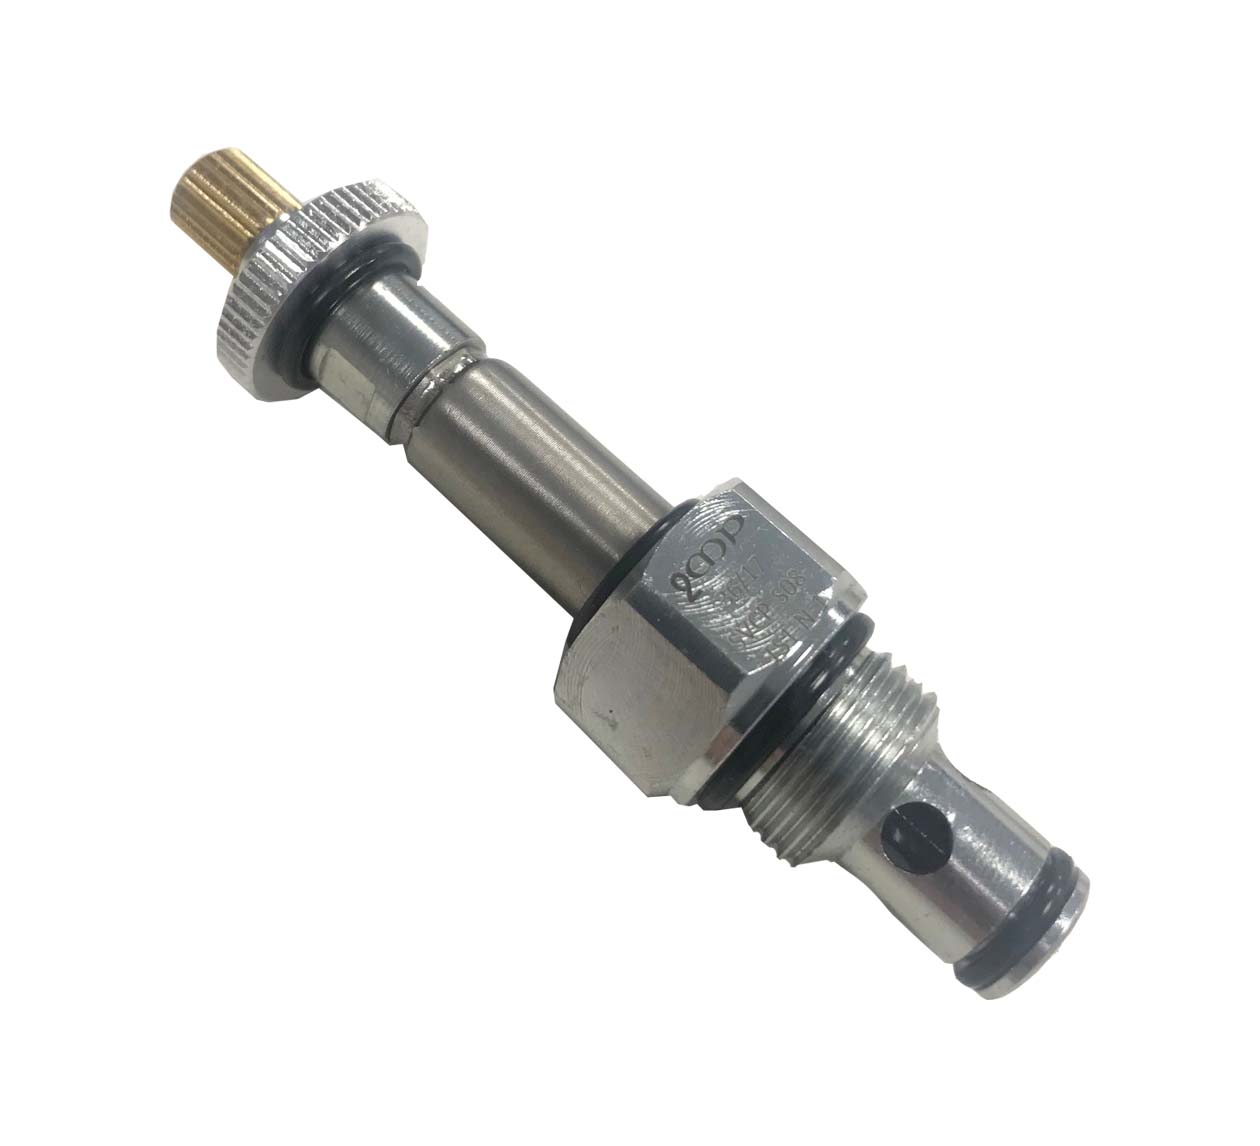 "Normally Closed 2 Way, 2 Position Cartridge Solenoid Valve With Manual